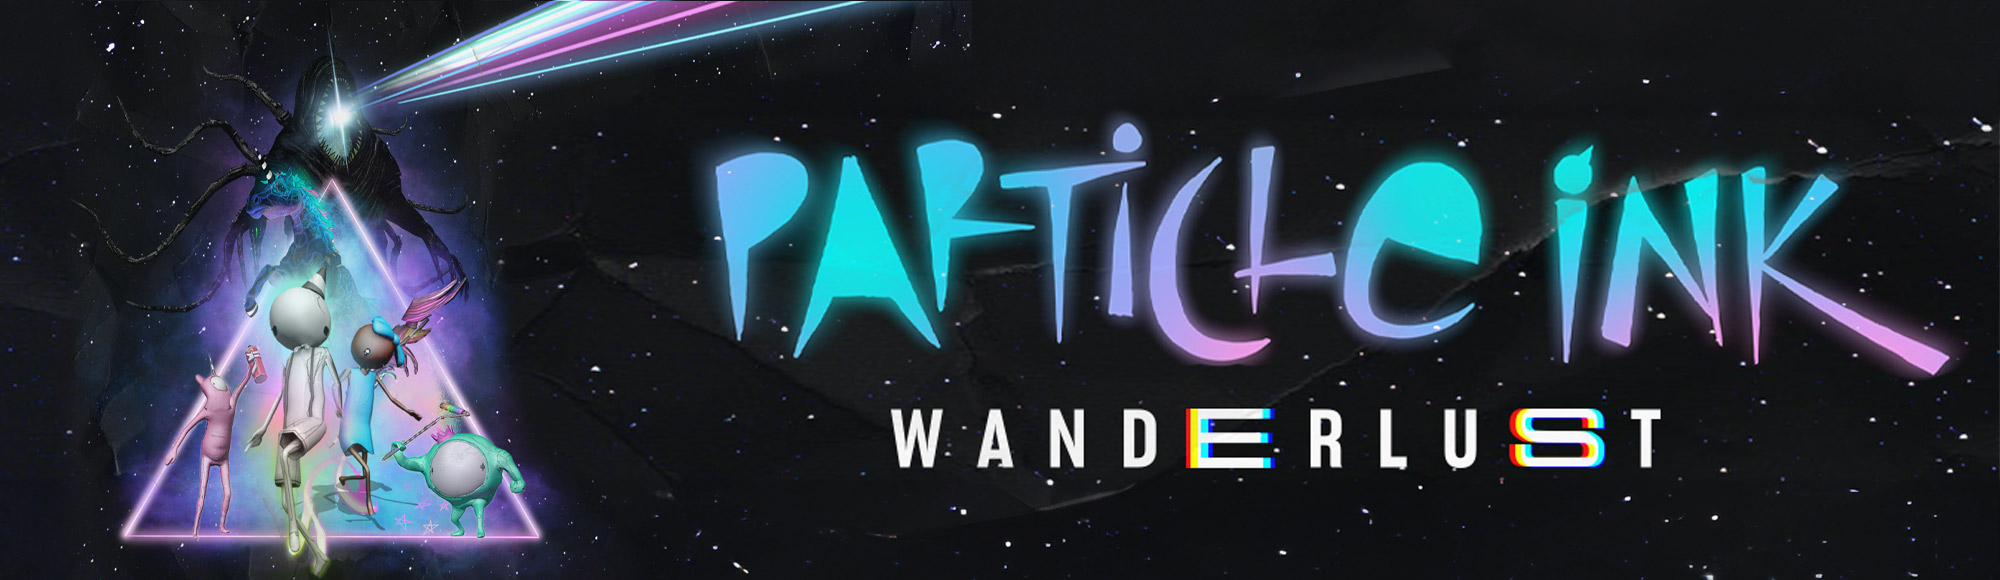 Particle Ink - The Wanderlust Experience show